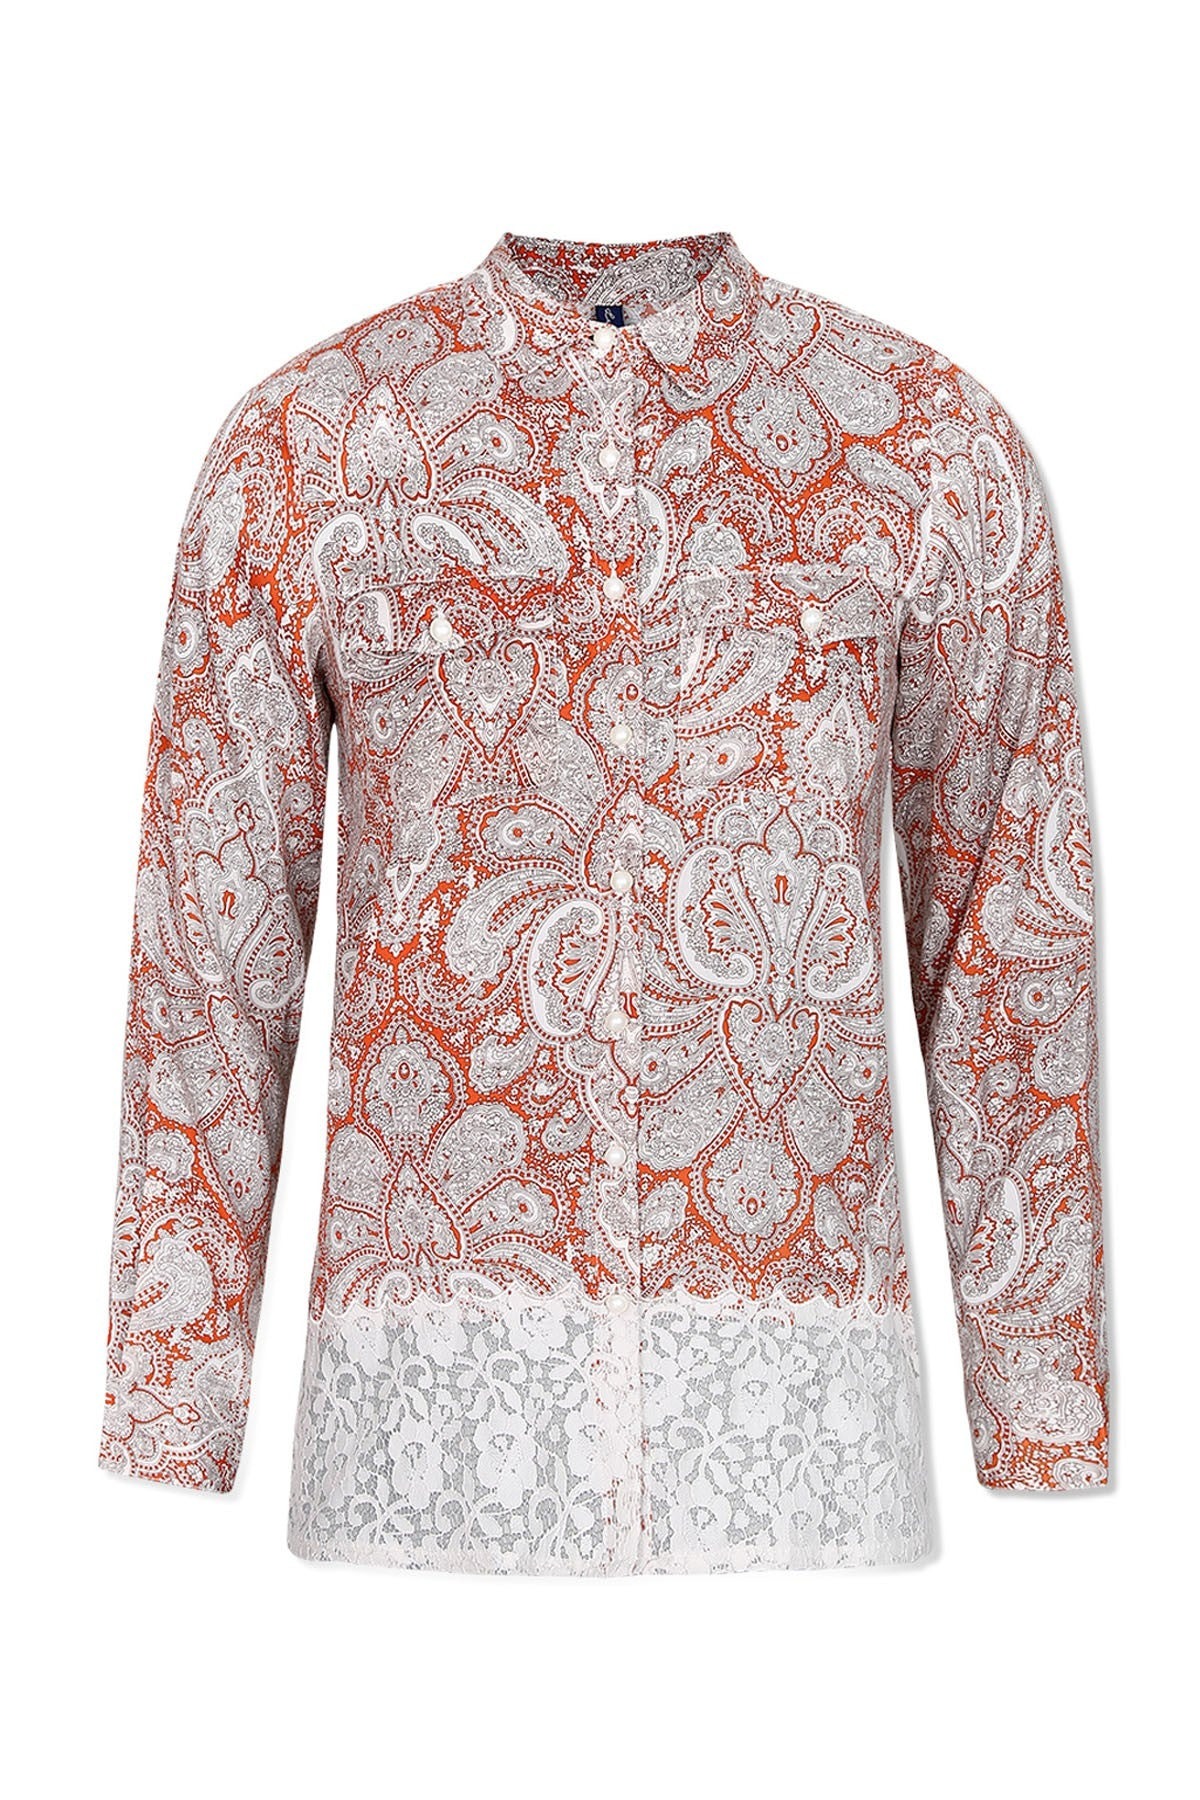 PRINTED DOUBLE POCKET TOP